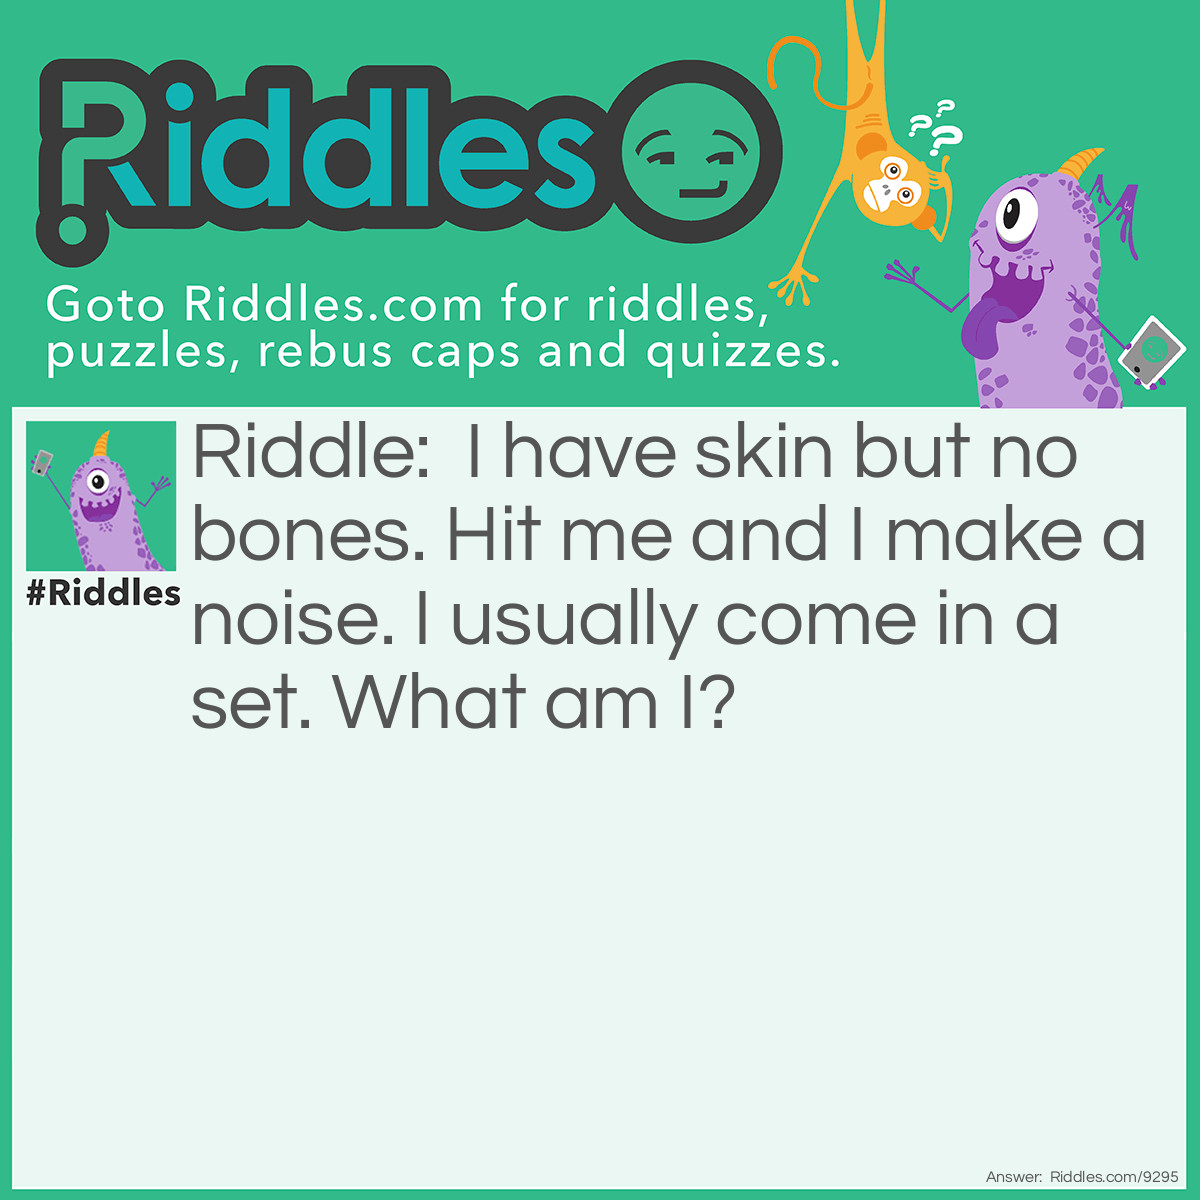 Riddle: I have skin but no bones. Hit me and I make a noise. I usually come in a set. What am I? Answer: A Drum.